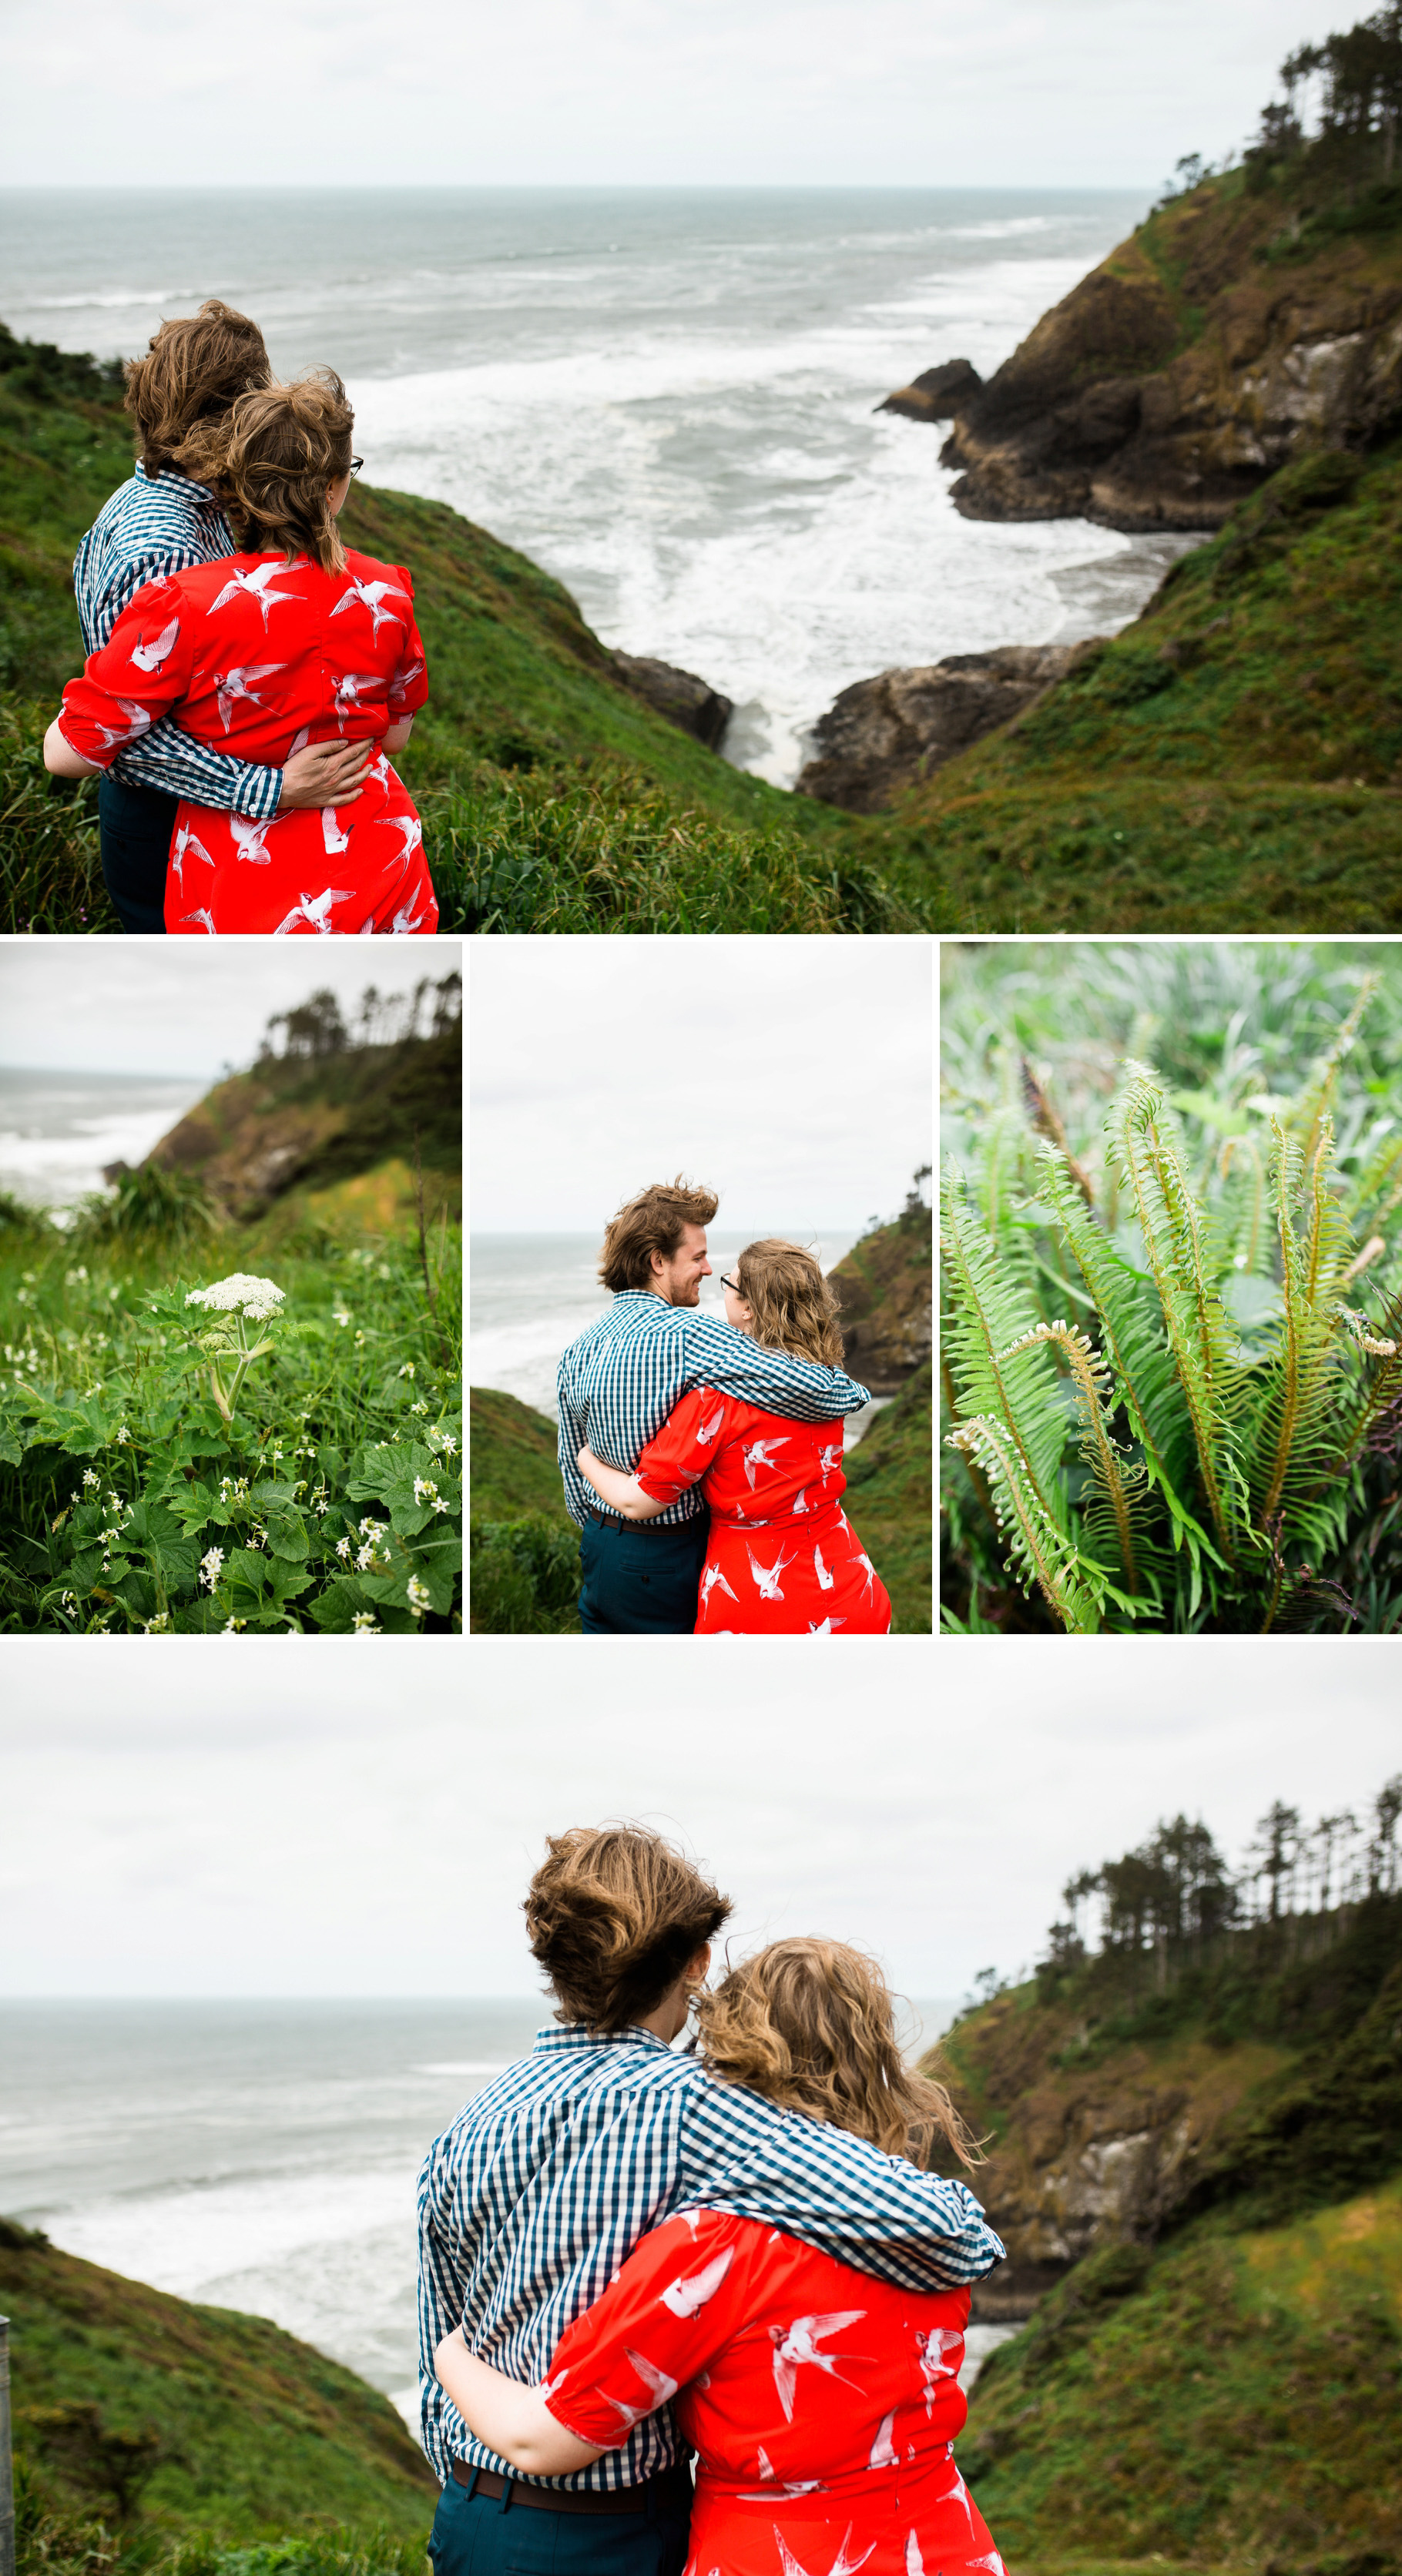 5-Ilwaco-Cape-Dissapointment-State-Park-Engagment-Session-Photos-North-Head-Lighthouse-Wedding-Photographer-Northwest-Seattle-Photography